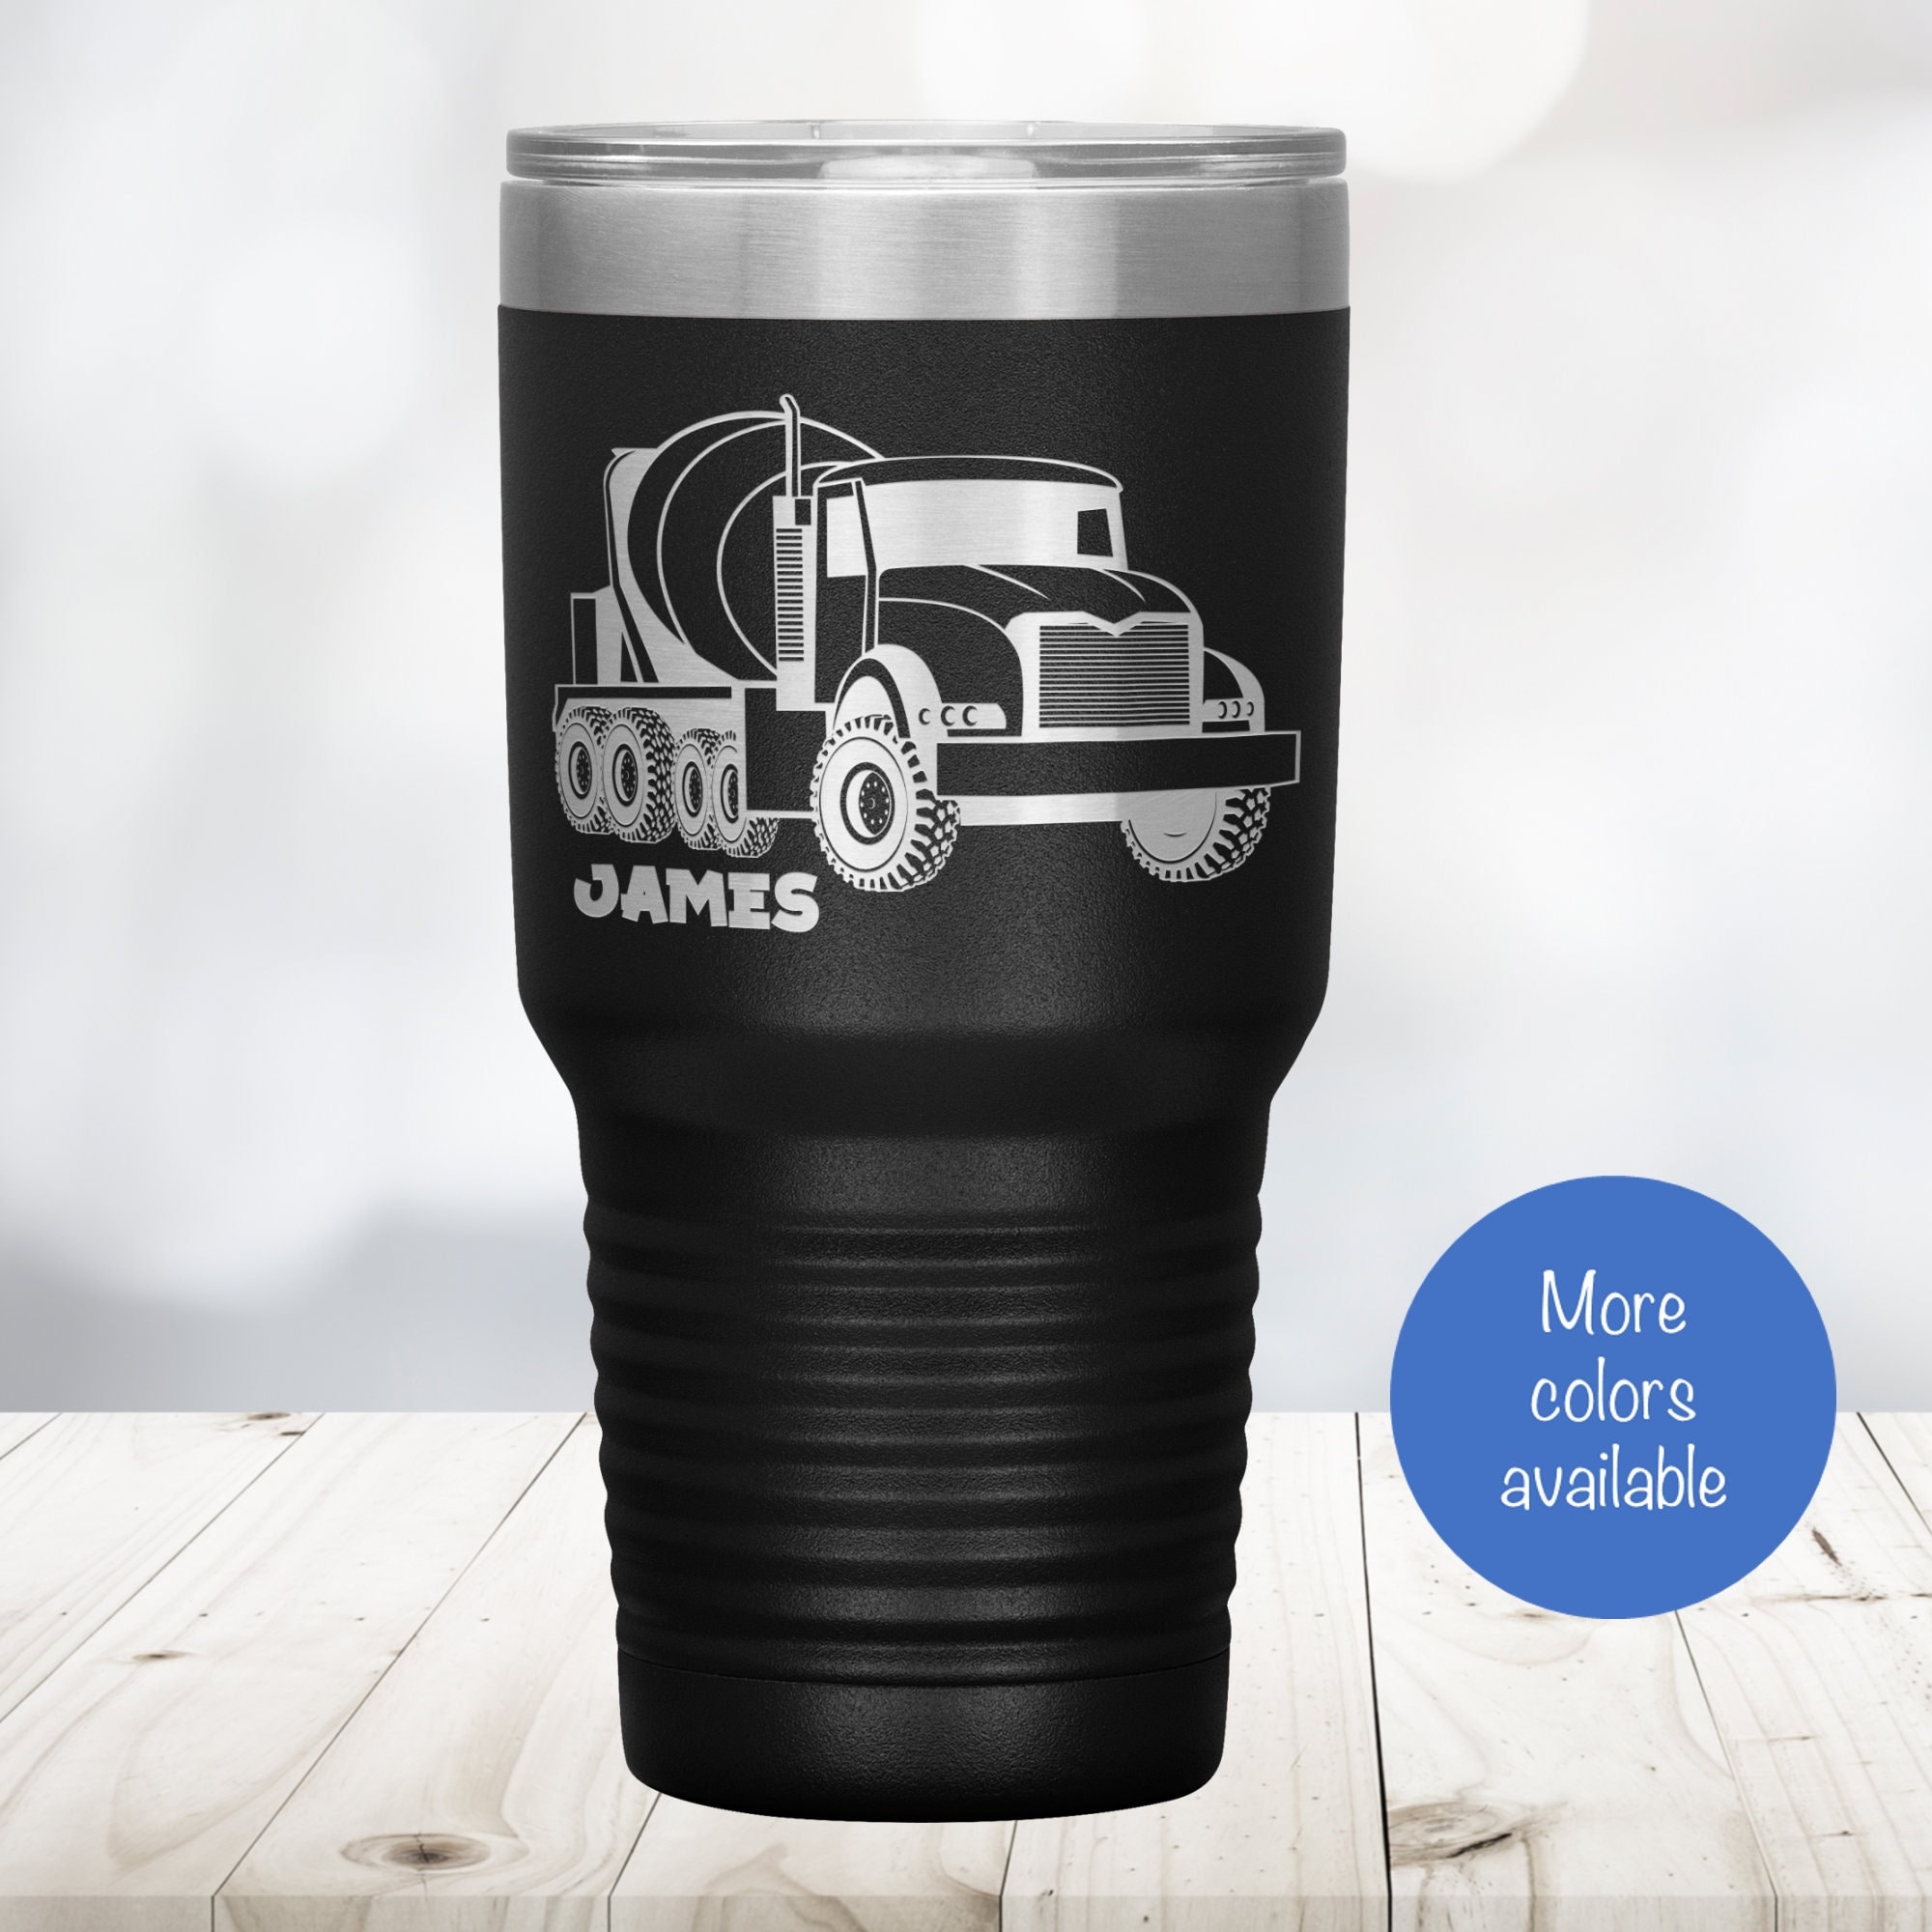 Personalized Concrete Mixer Mug. Coffee Mug With Yellow Cement